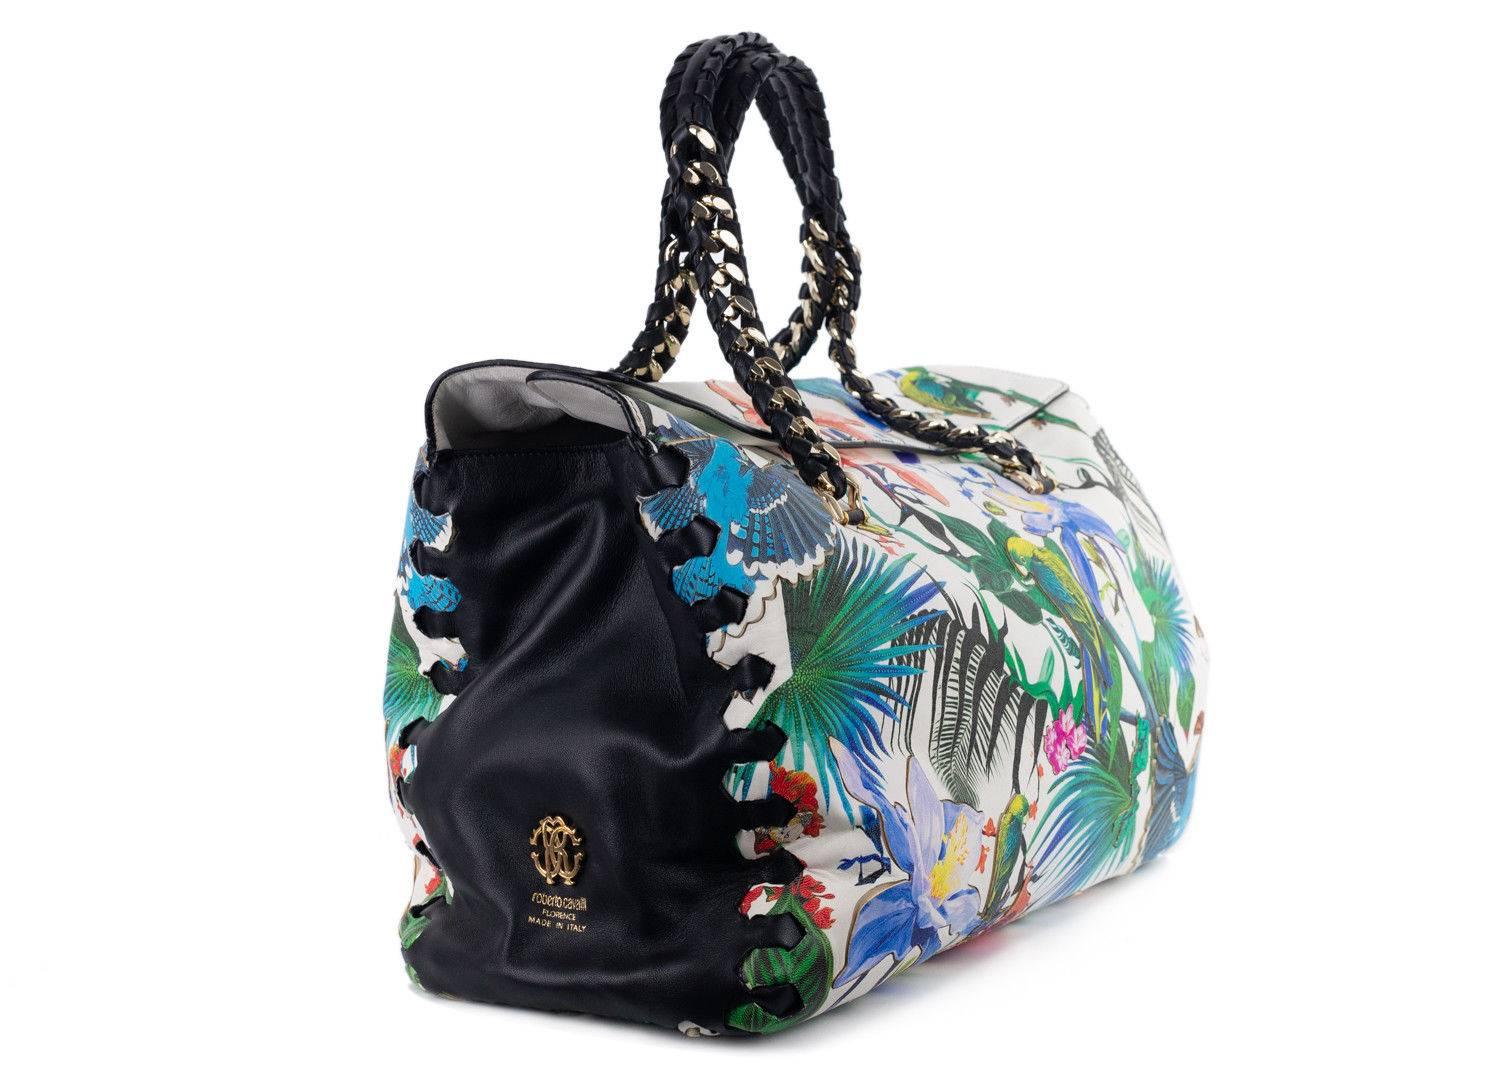 Roberto Cavalli multicolor leather tote bag. This tote bag features a theme of tropical and floral print of birds, flowers and trees. This large bag is great to store all your essentials in for your everyday lifestyle. Pair it with simple denim